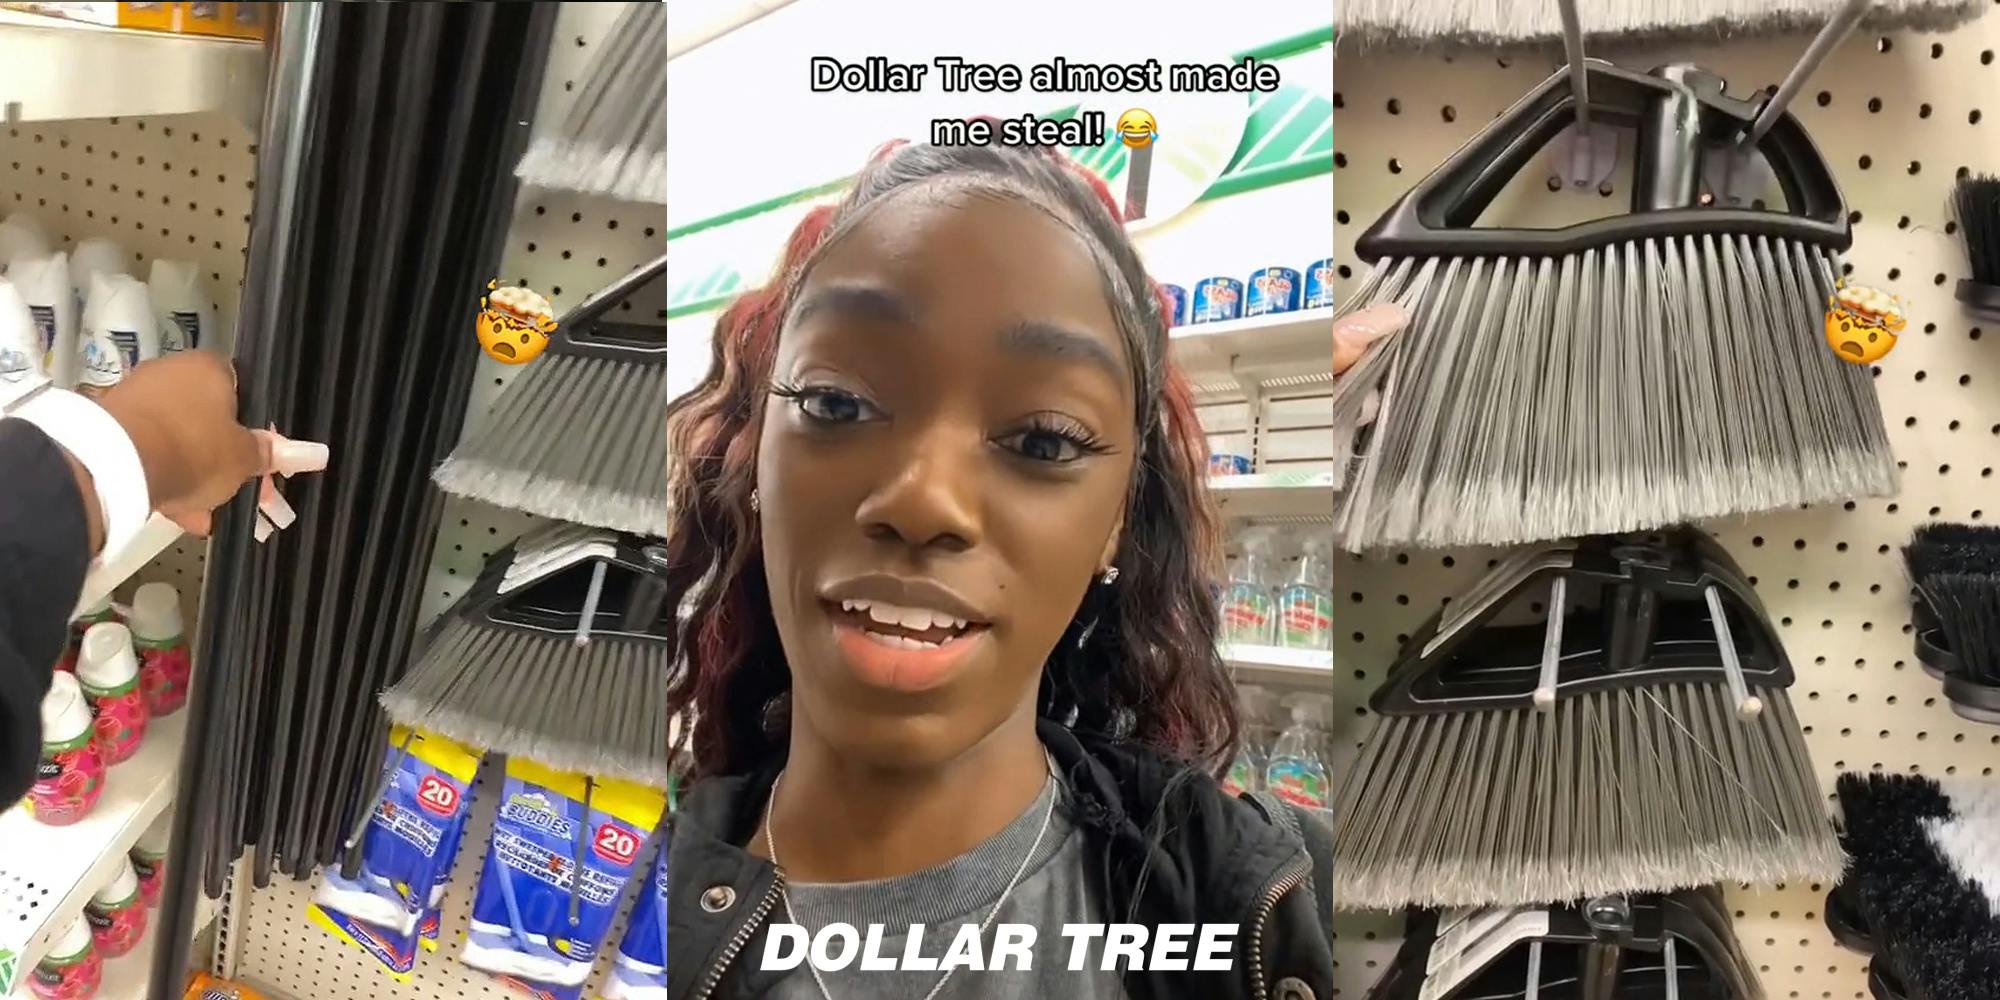 woman holding broom stick from Dollar Tree (l) woman speaking in Dollar Tree with caption "Dollar Tree almost made me steal!" with Dollar Tree logo at bottom (c) Dollar Tree broom brush end being held up (r)